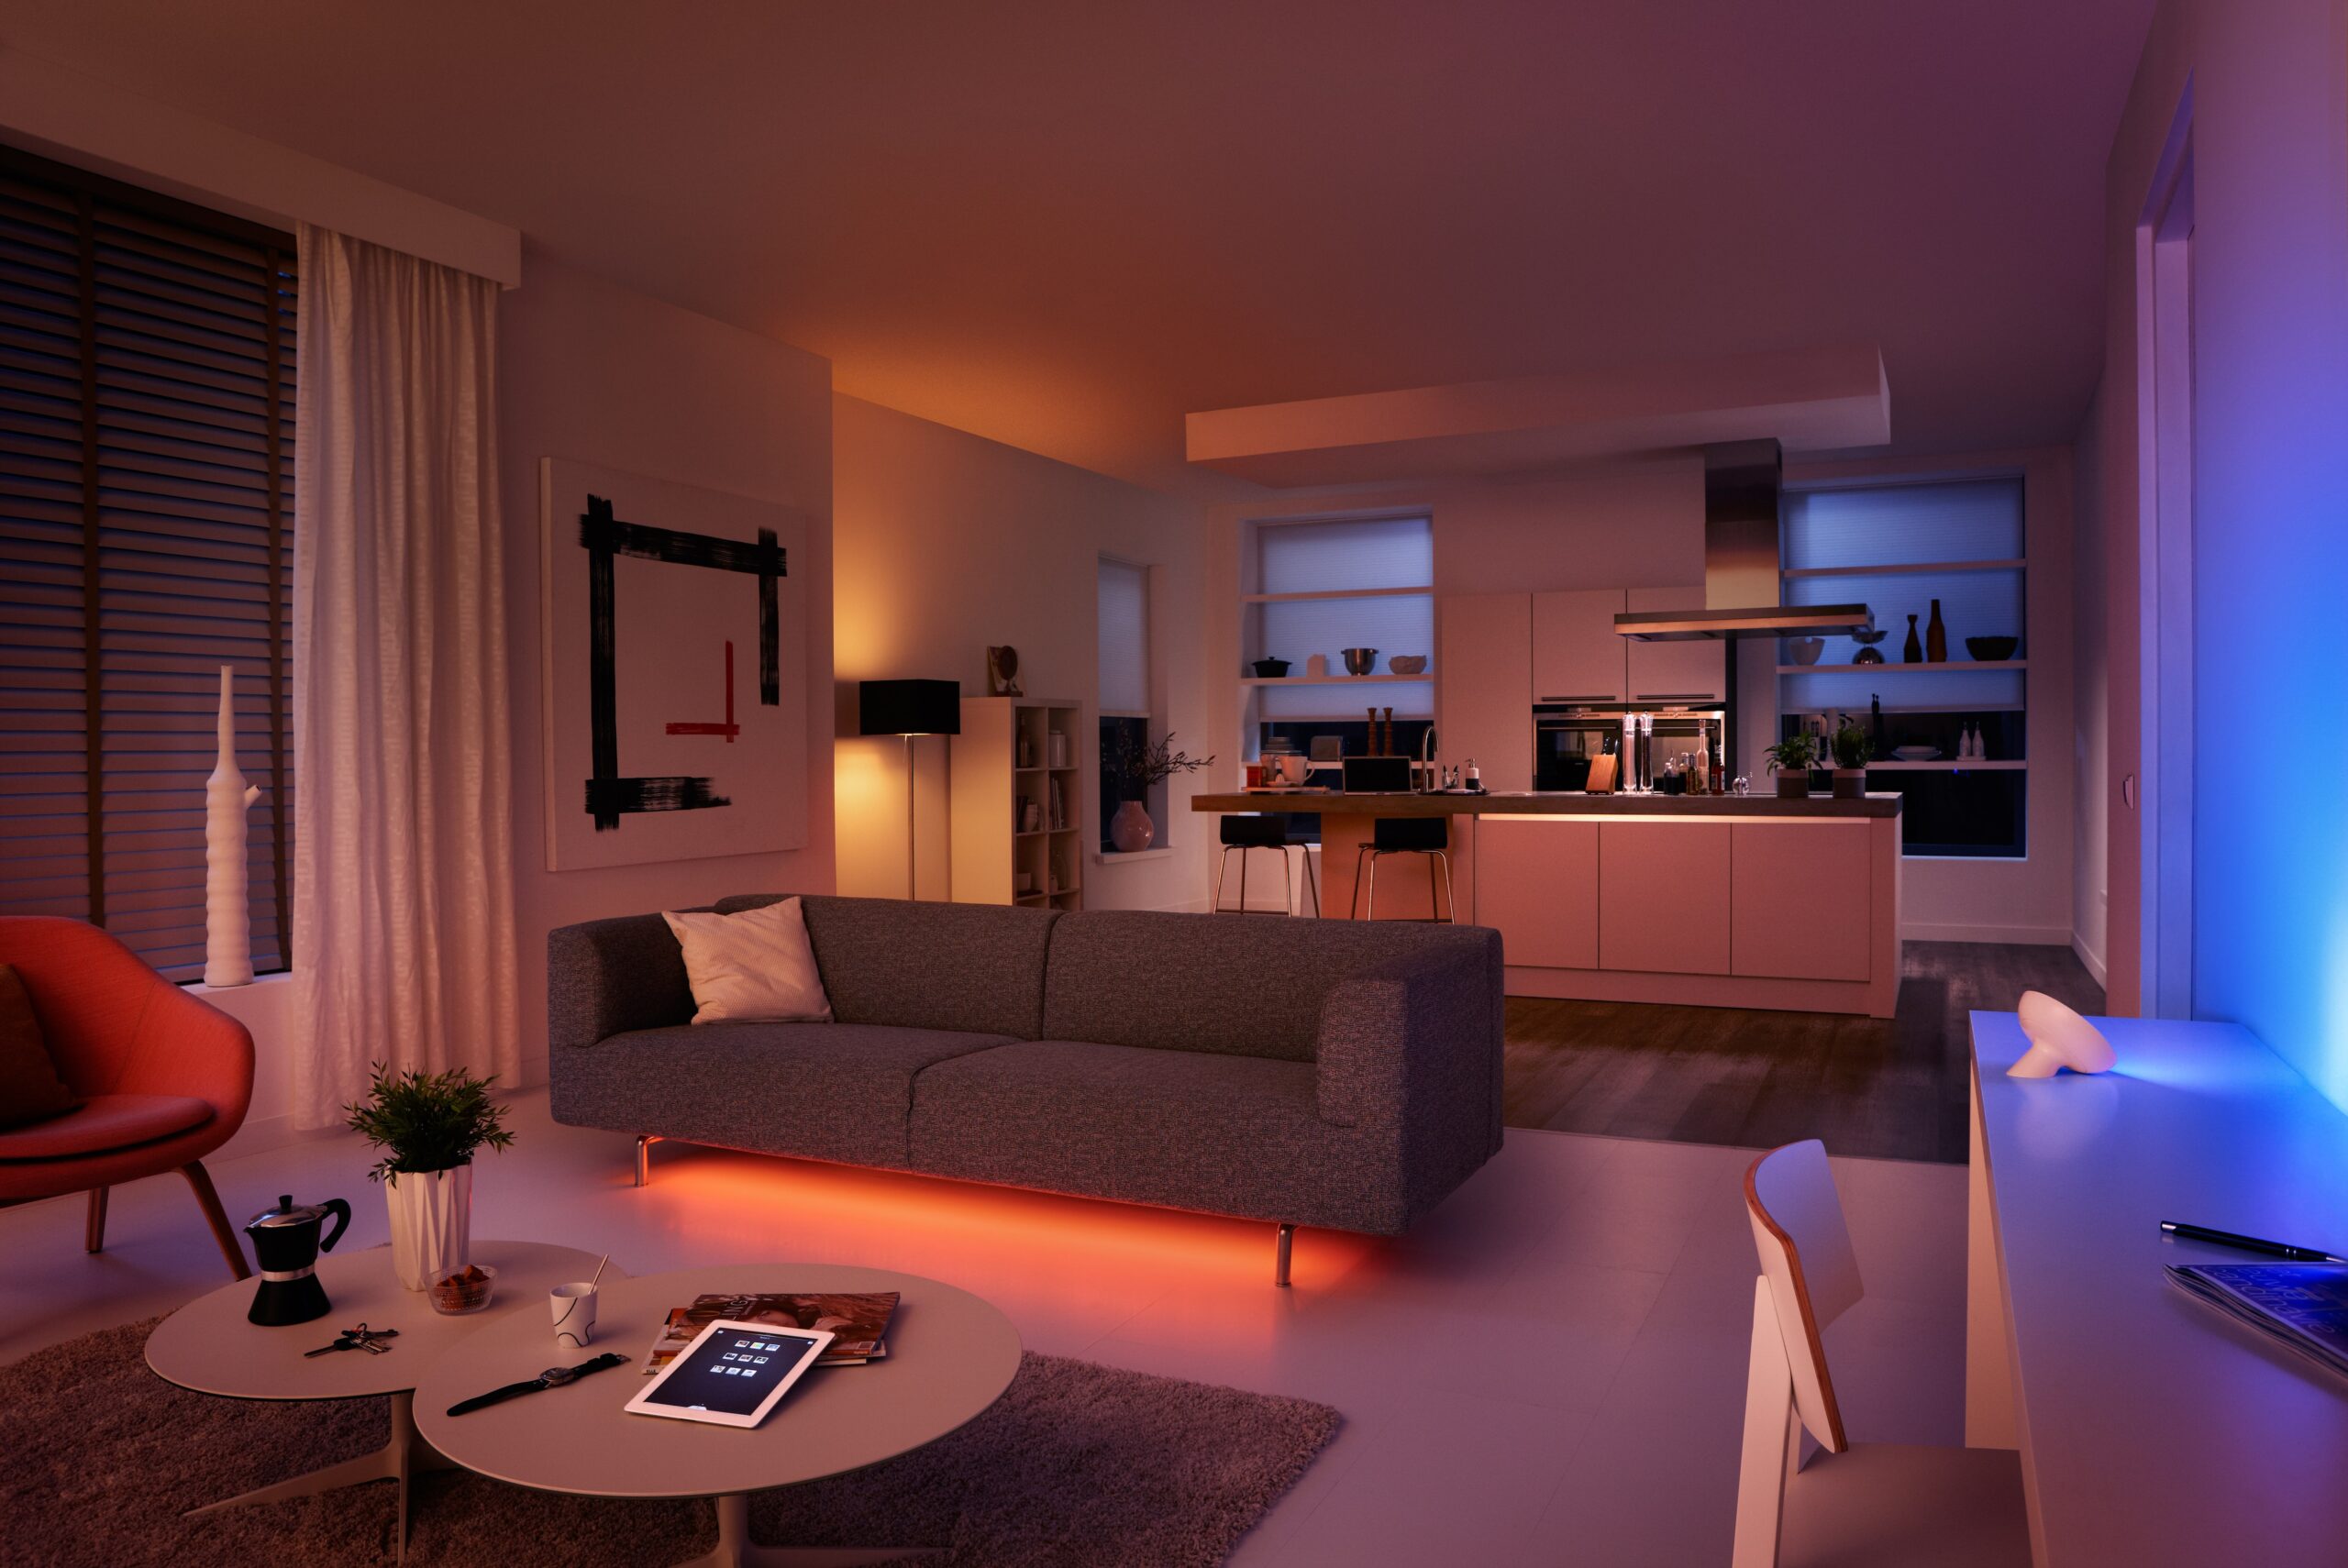 LivingColors LightStrips Room Lifestyle scaled